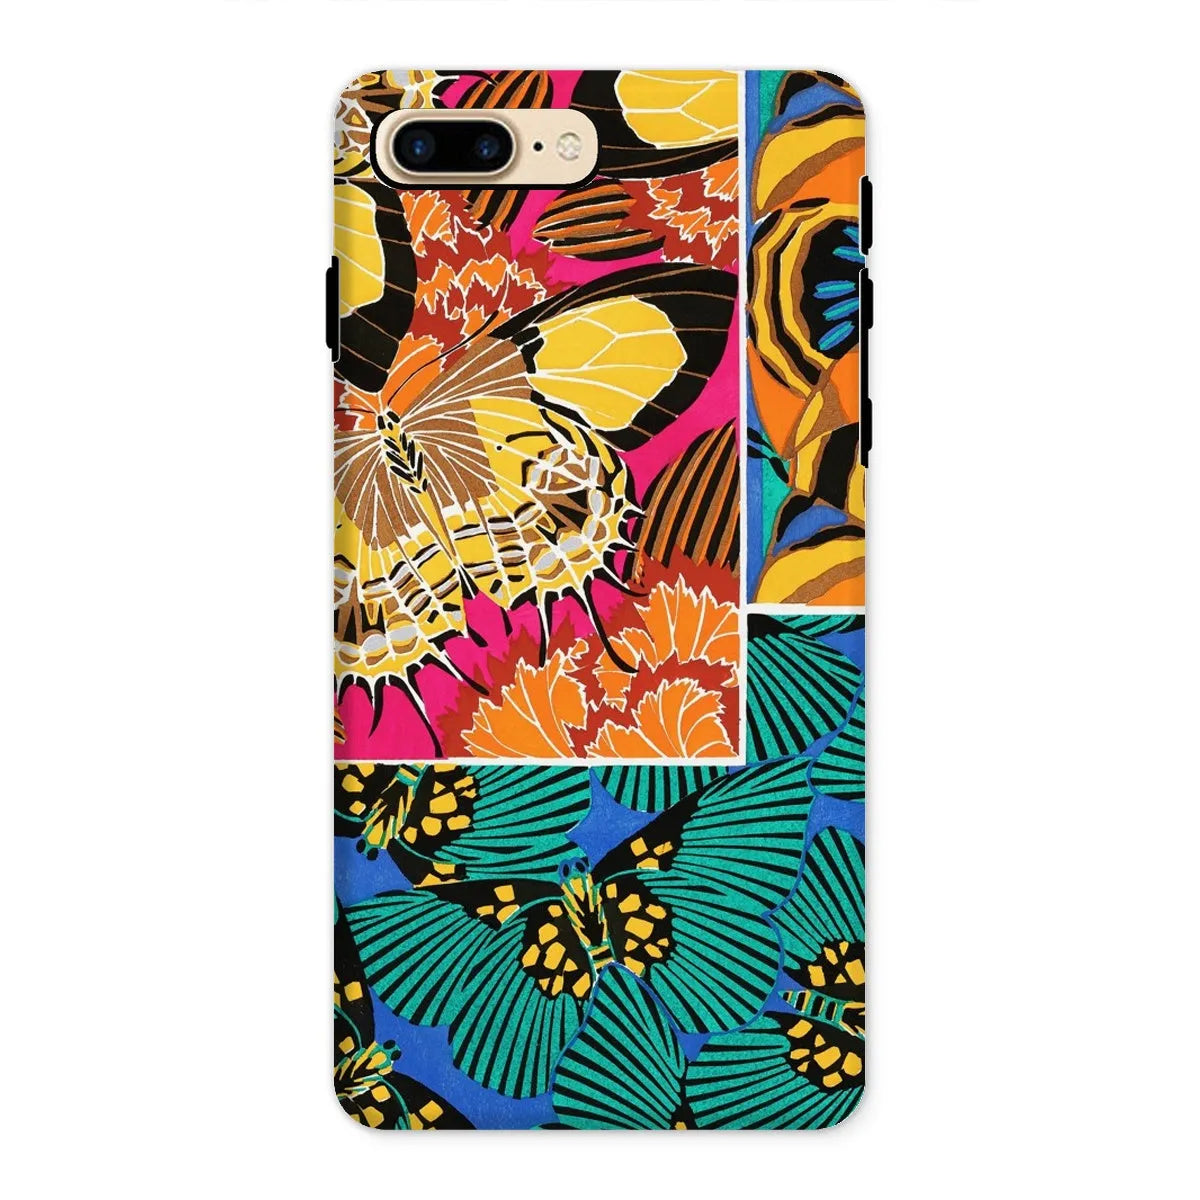 Rainbow Butterfly Aesthetic Art Phone Case - E.a. Seguy - Iphone 8 Plus / Matte - Mobile Phone Cases - Aesthetic Art